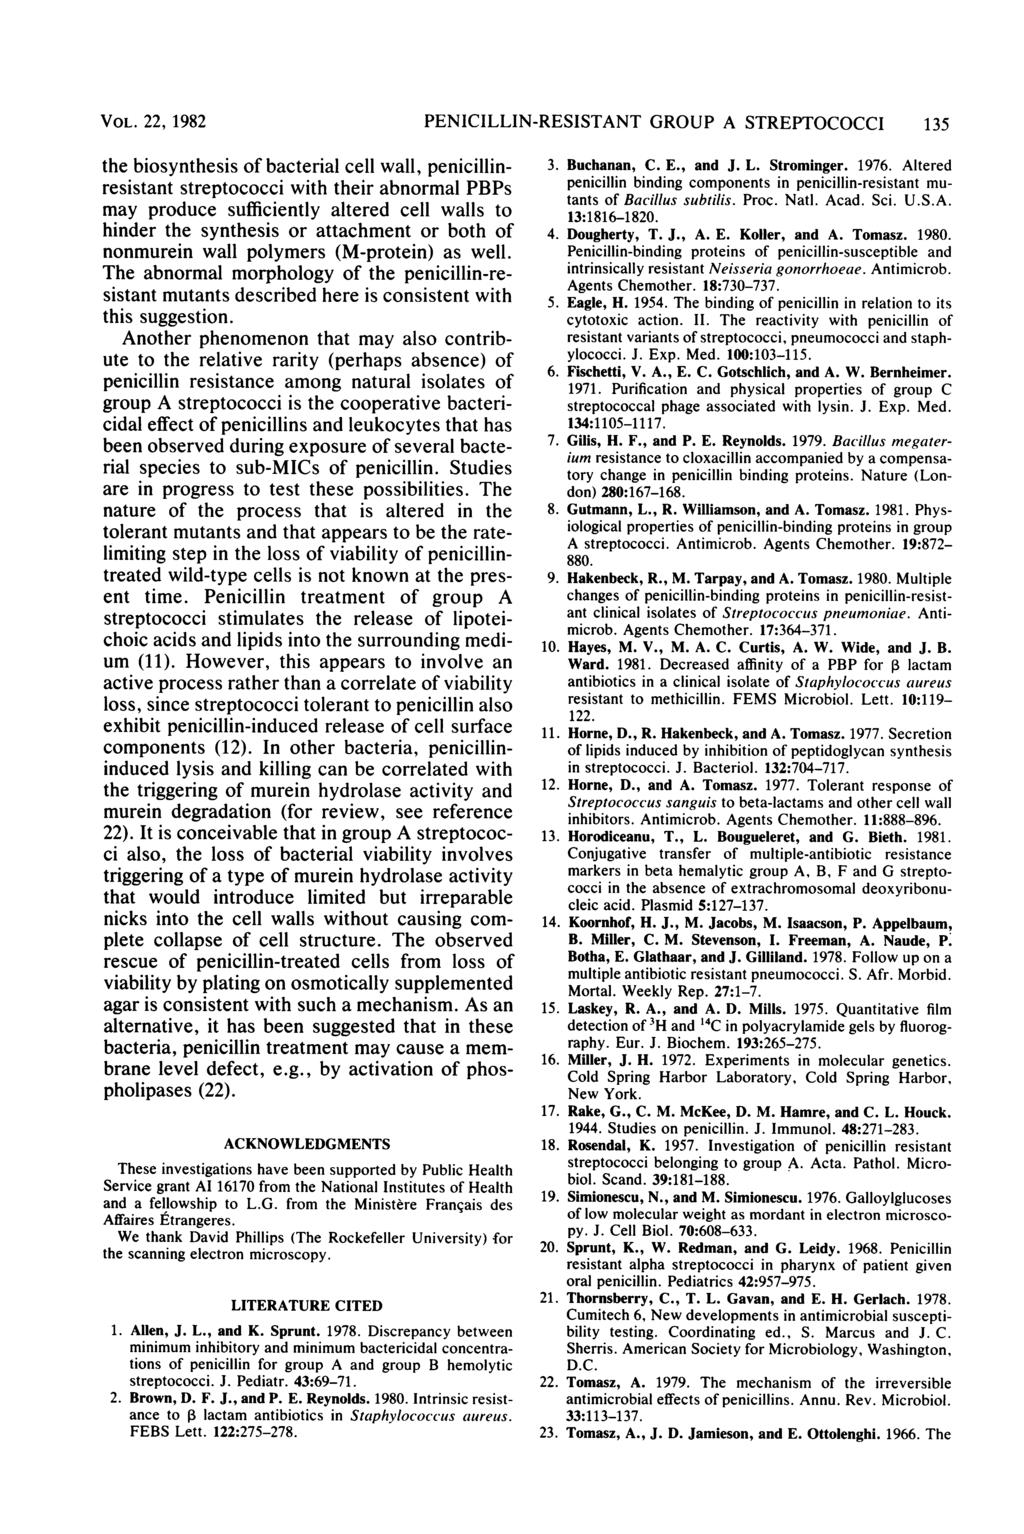 VOL. 22, 1982 the biosynthesis of bacterial cell wall, penicillinresistant streptococci with their abnormal PBPs may produce sufficiently altered cell walls to hinder the synthesis or attachment or